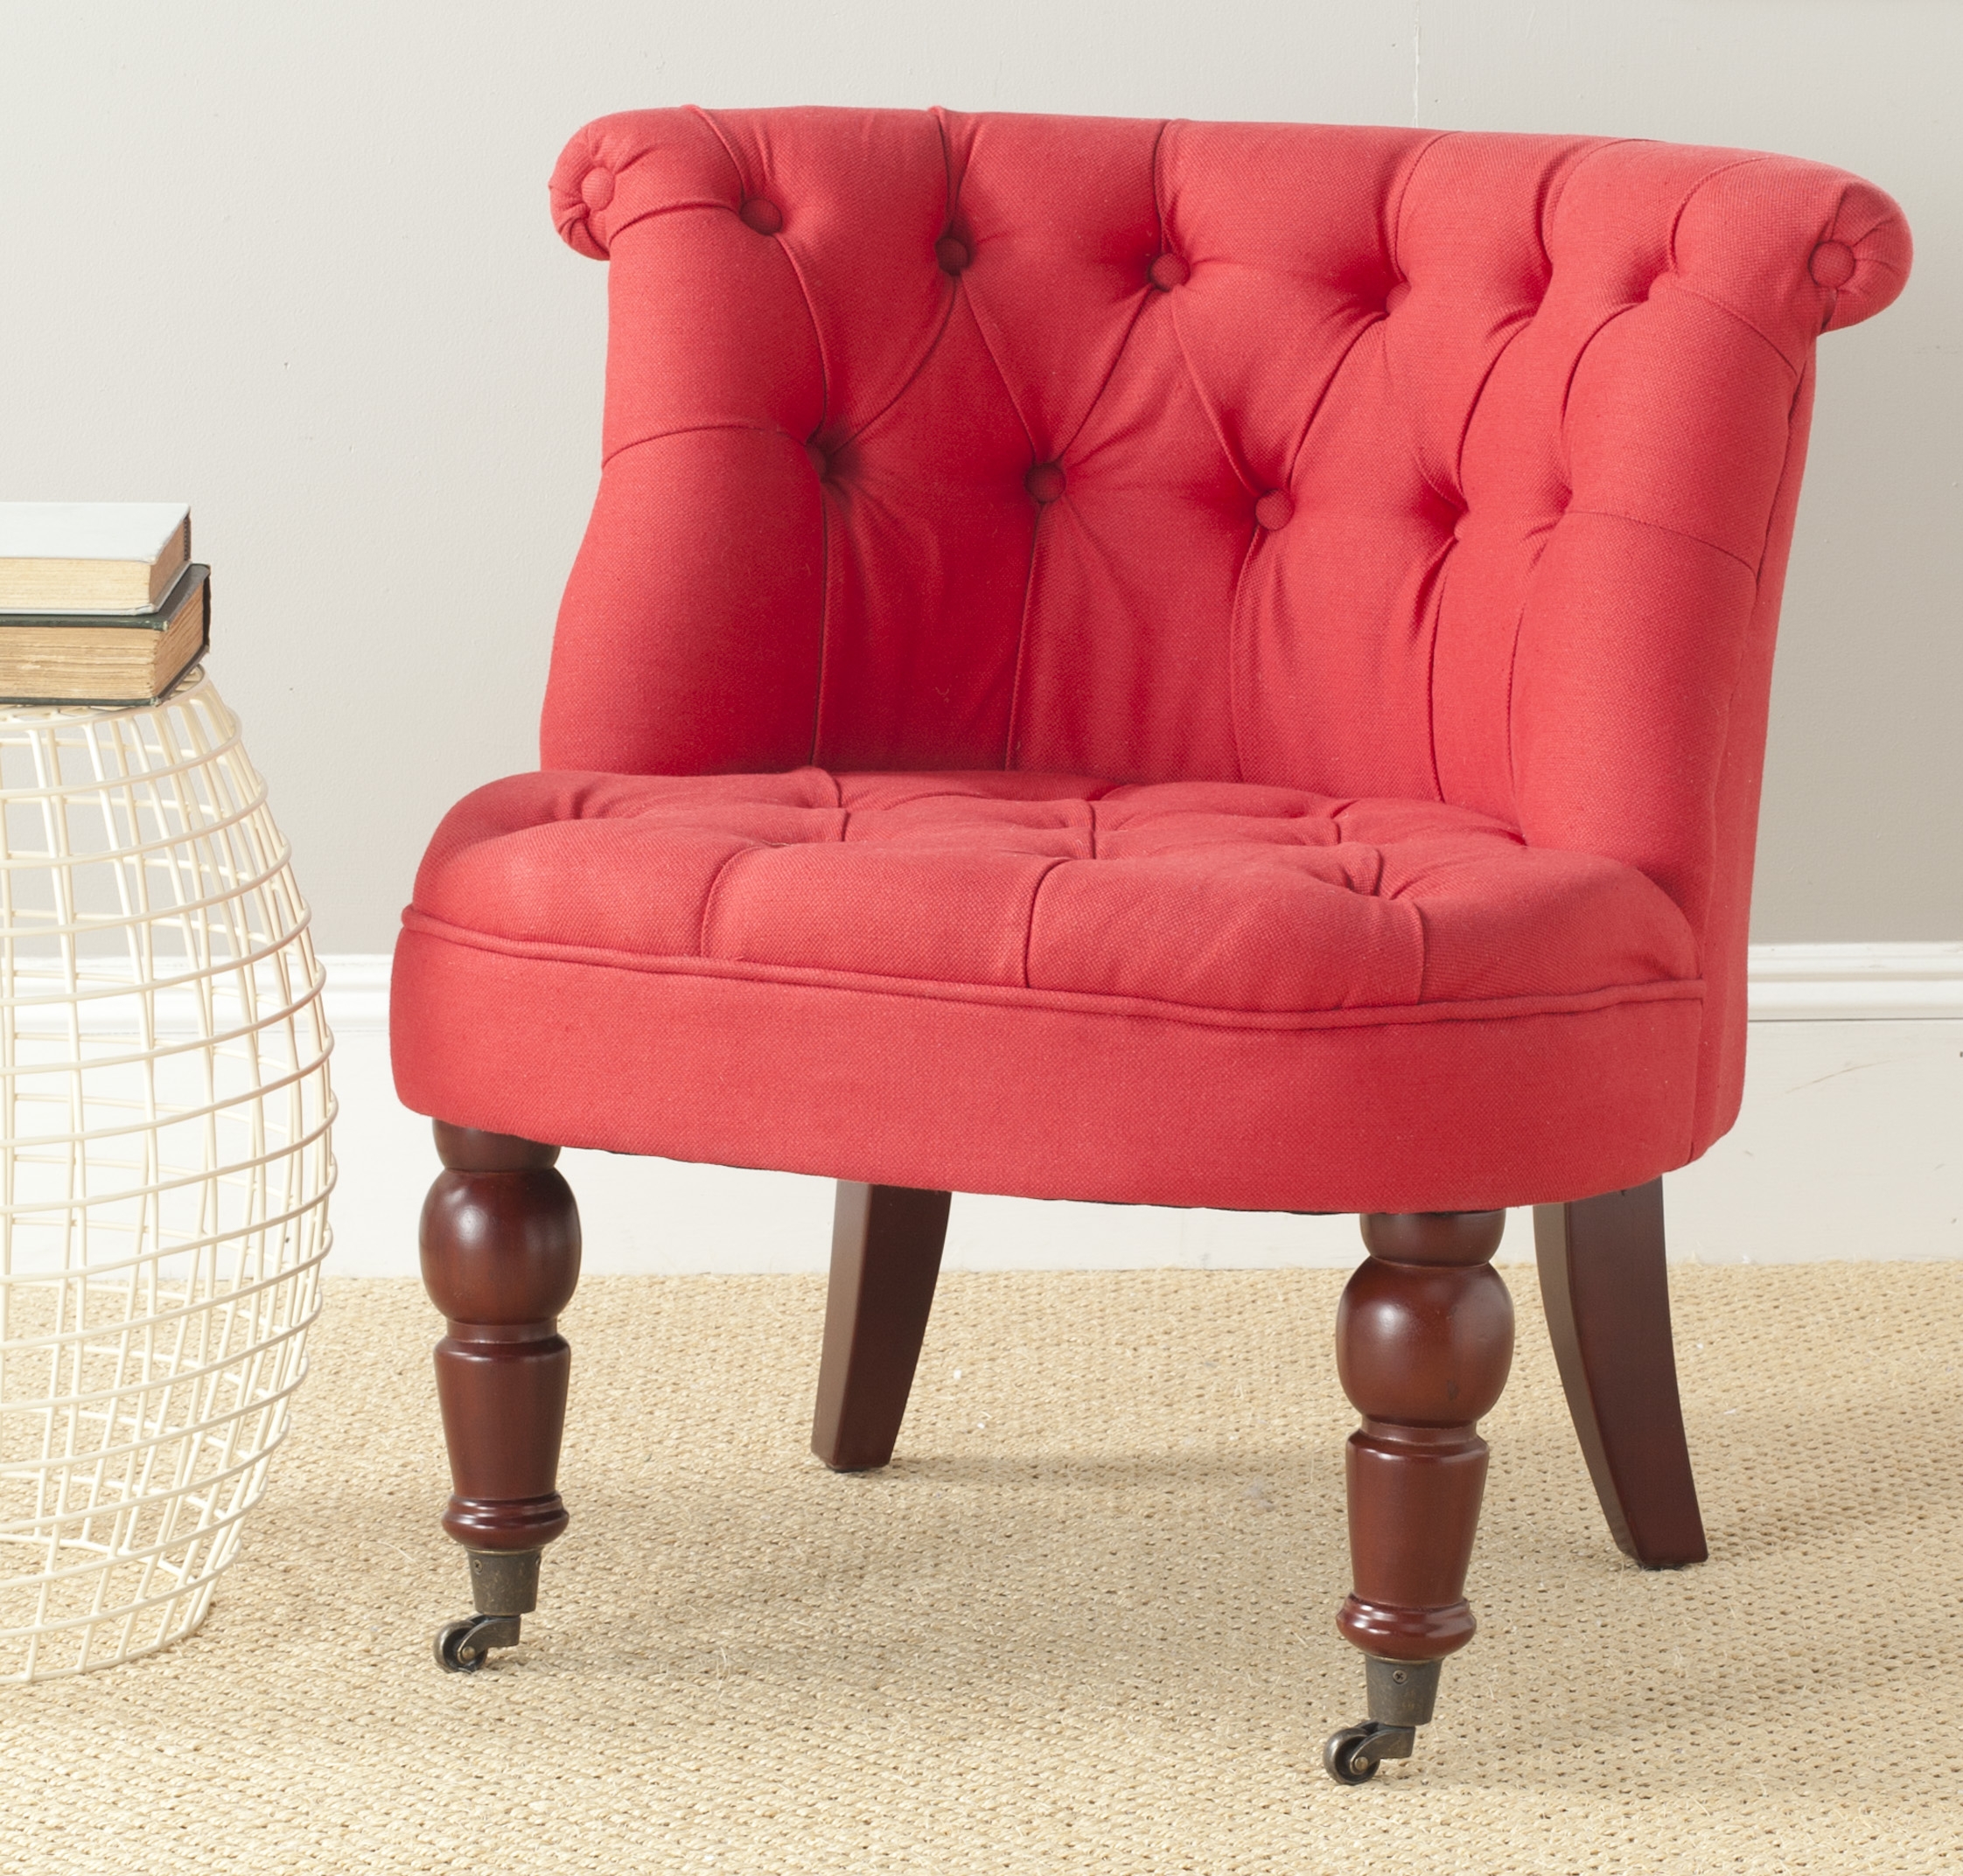 Carlin Tufted Chair - Cranberry/Cherry Mahogany - Arlo Home - Image 4